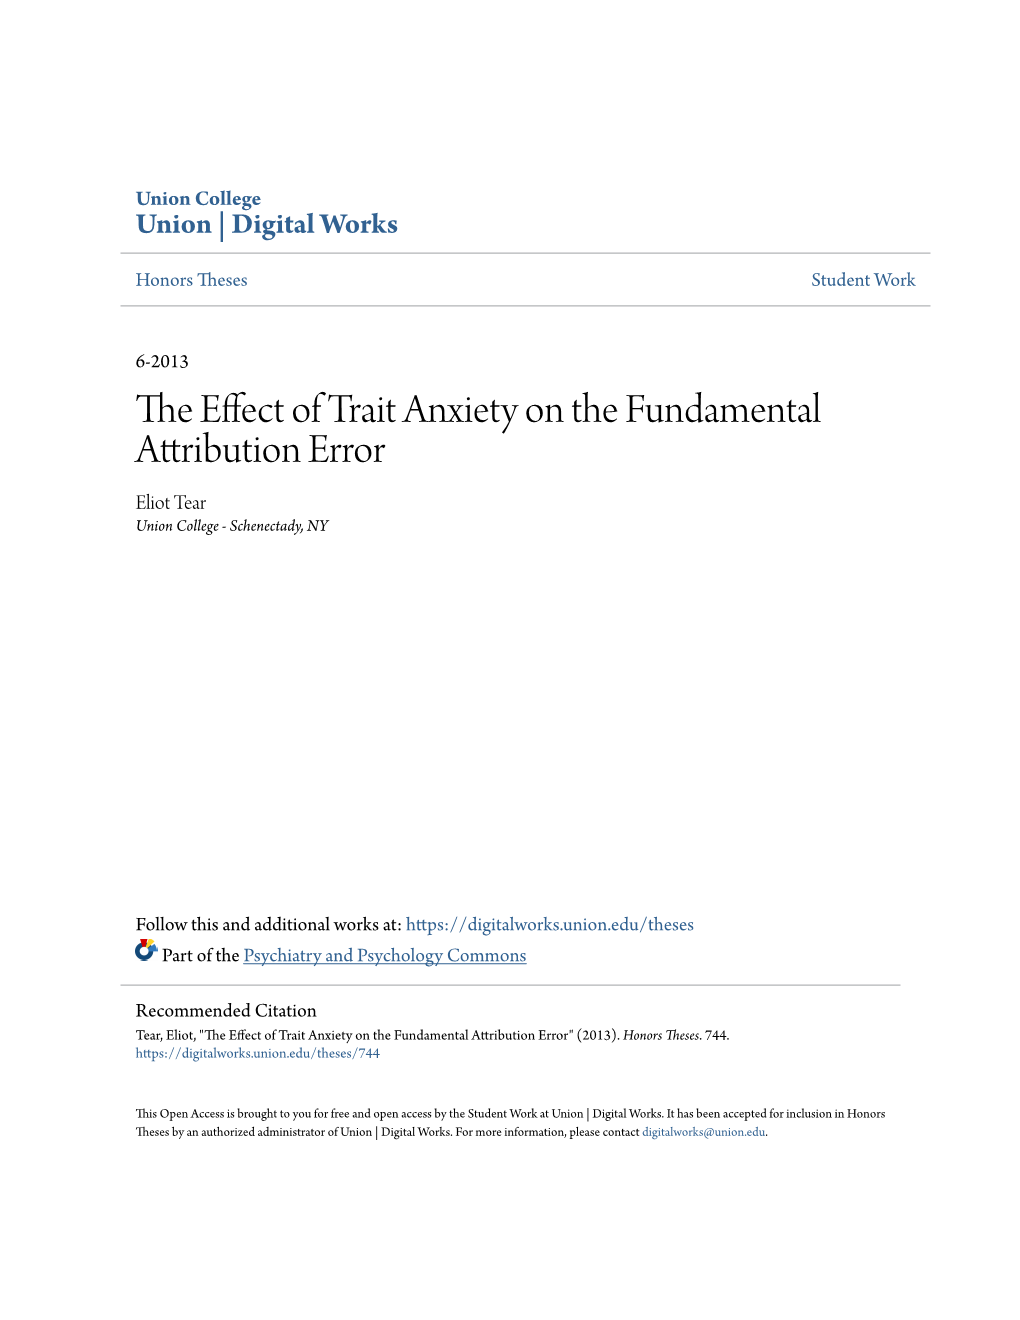 The Effect of Trait Anxiety on the Fundamental Attribution Error" (2013)